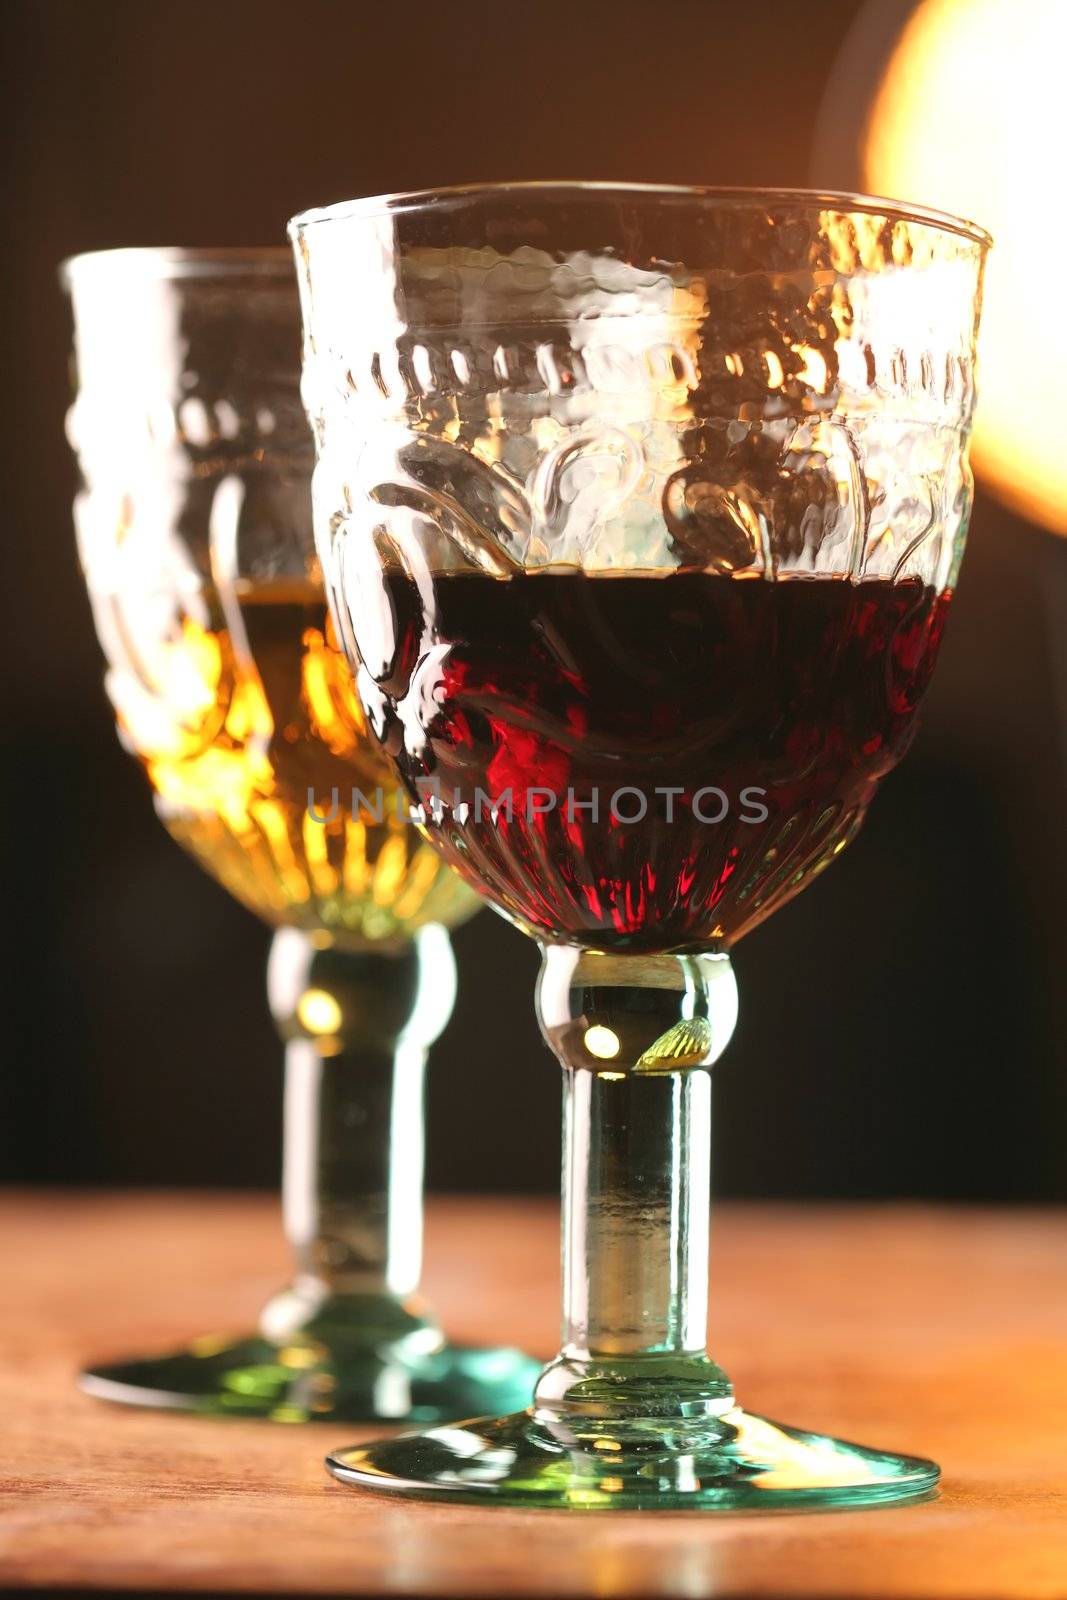 Two Goblets with White and Red Wine in Light Evening Sun, Medieval Style